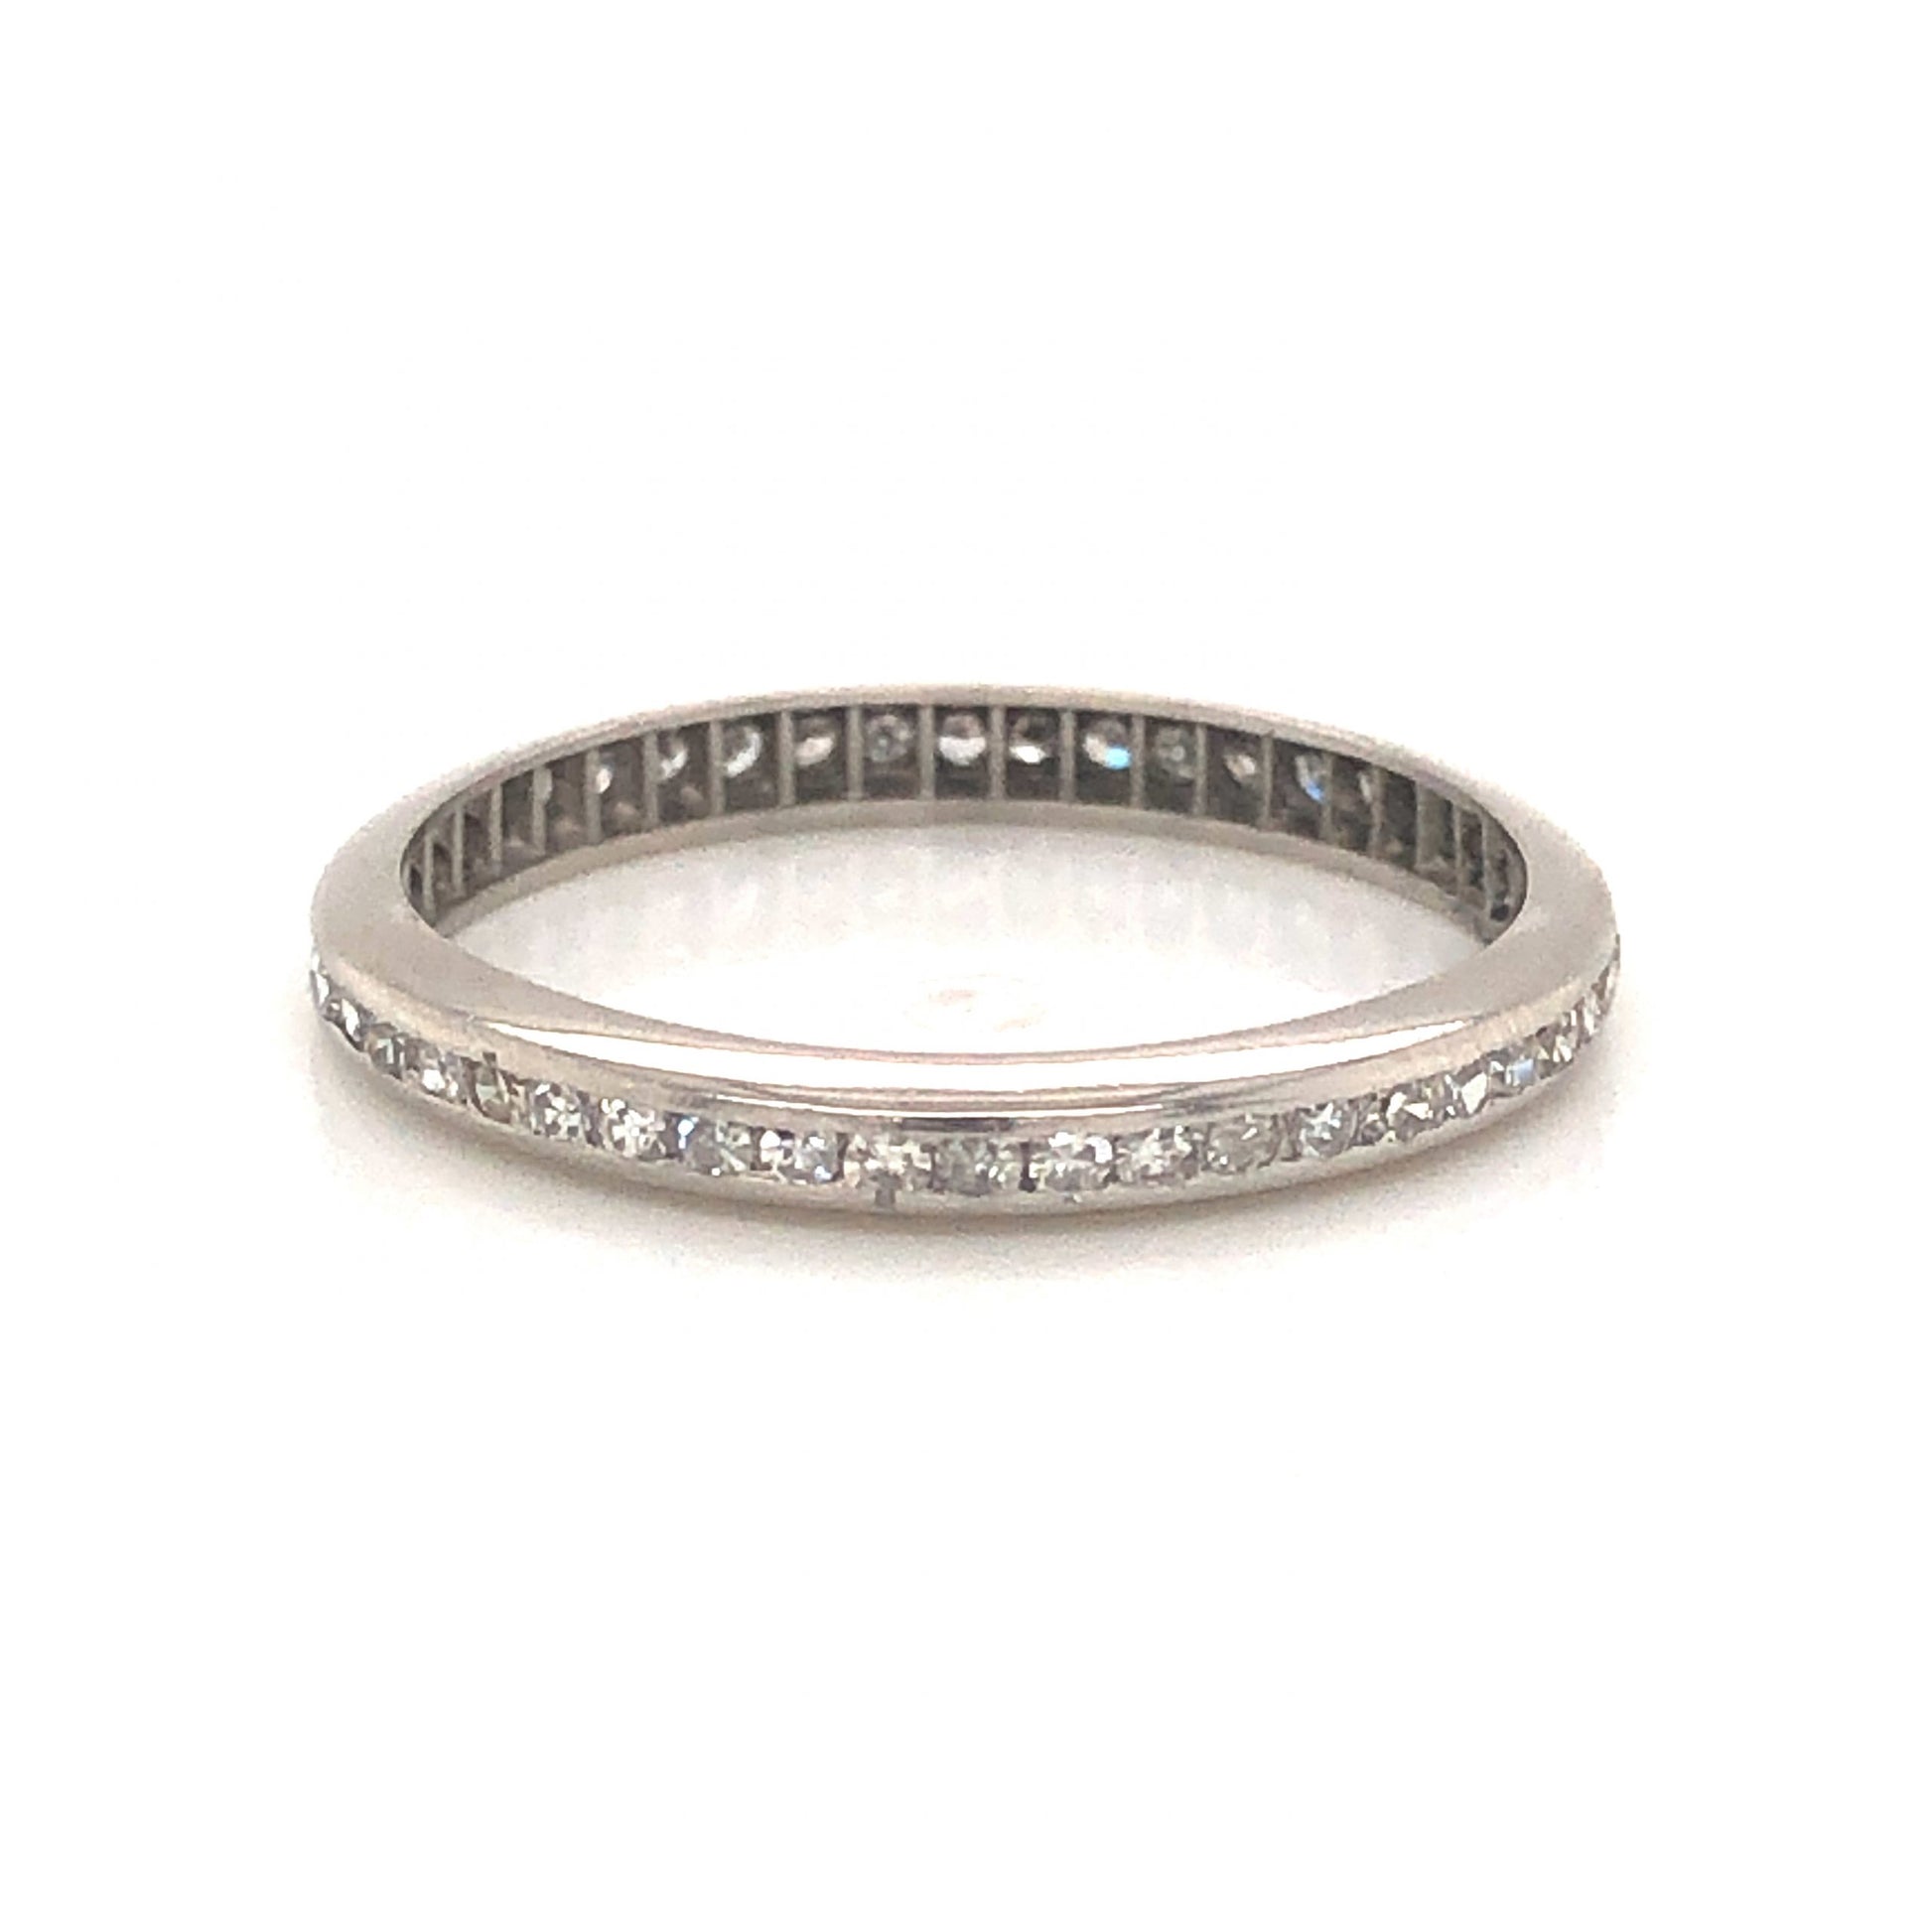 .48 Single Cut Diamond Eternity Band in PlatinumComposition: Platinum Ring Size: 6 Total Diamond Weight: .48ct Total Gram Weight: 1.7 g